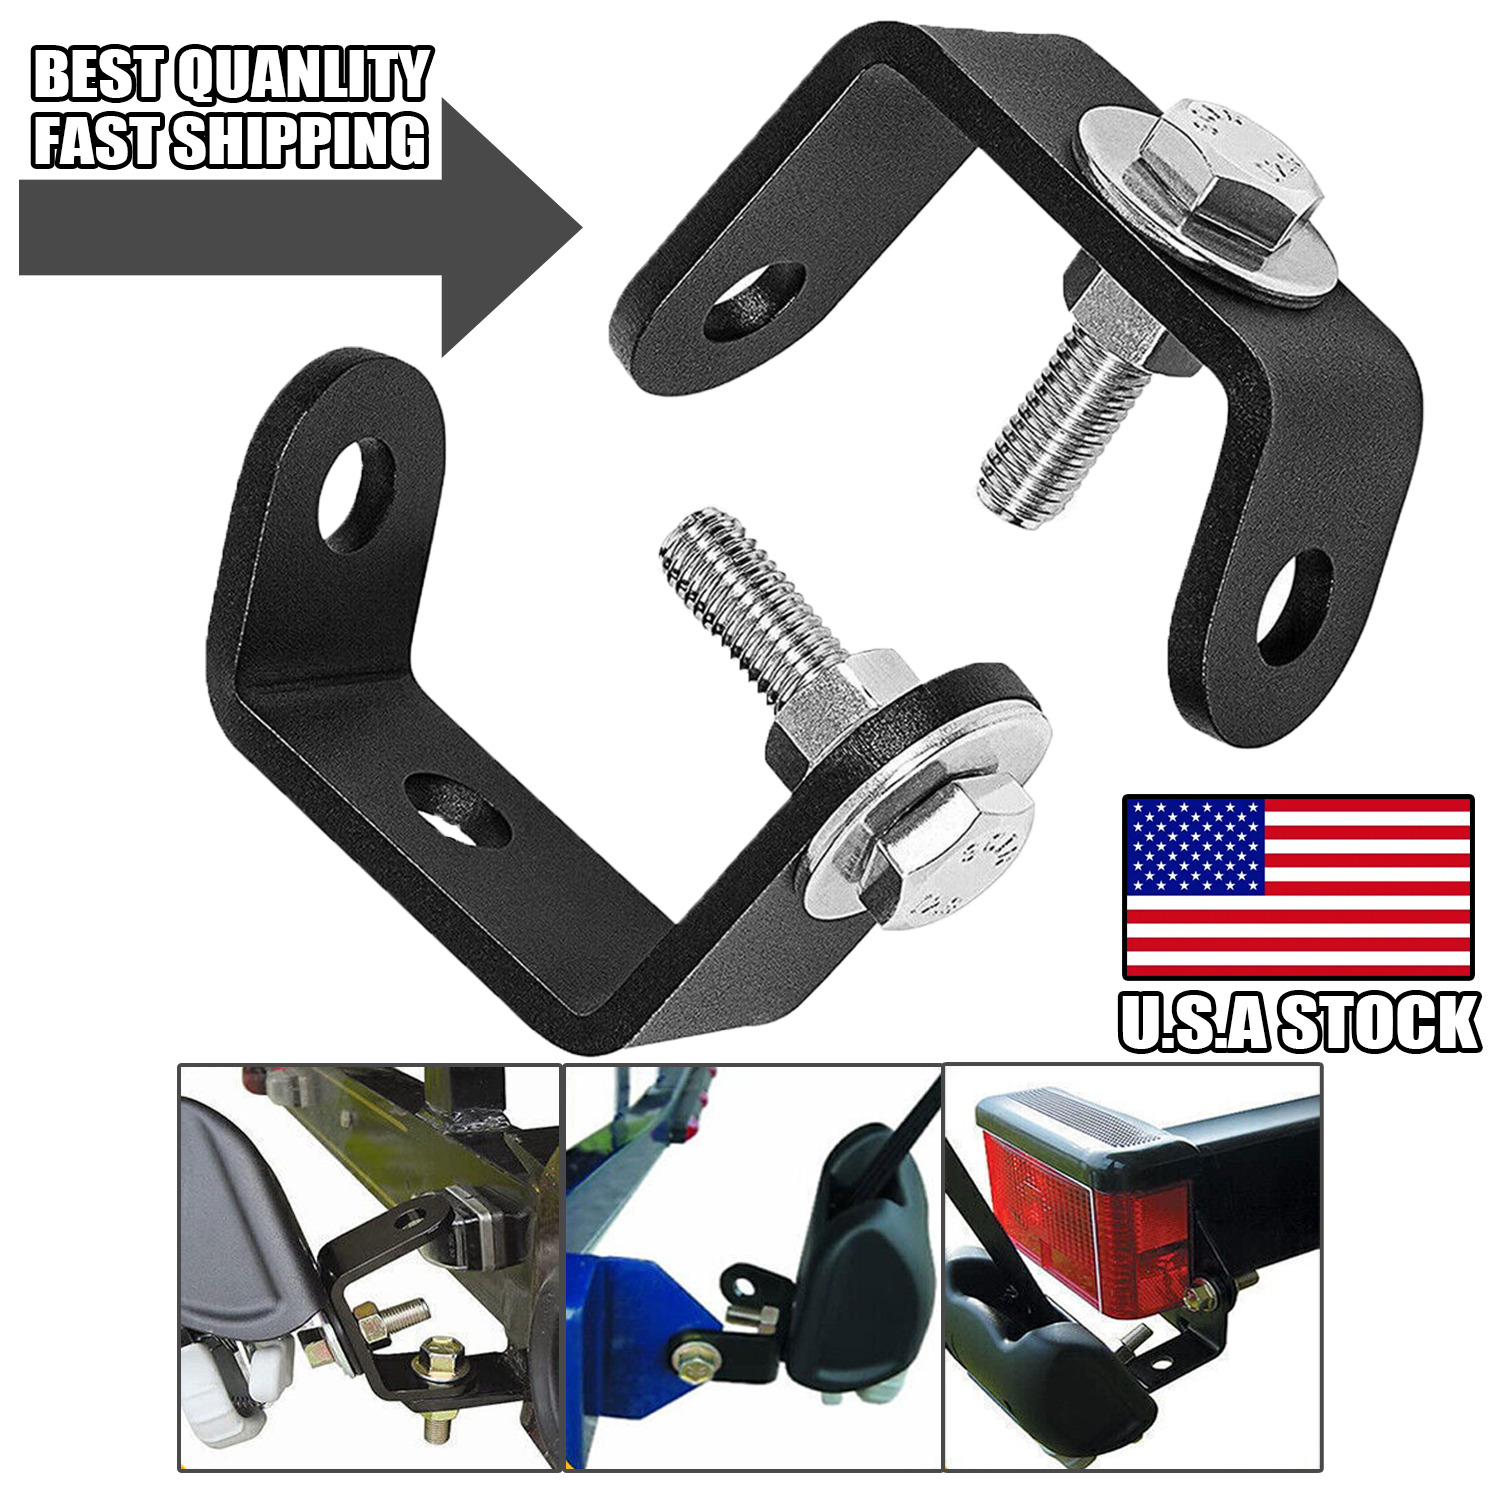 F14254 For BoatBuckle G2 Universal Retractable Transom Straps Mounting Bracket